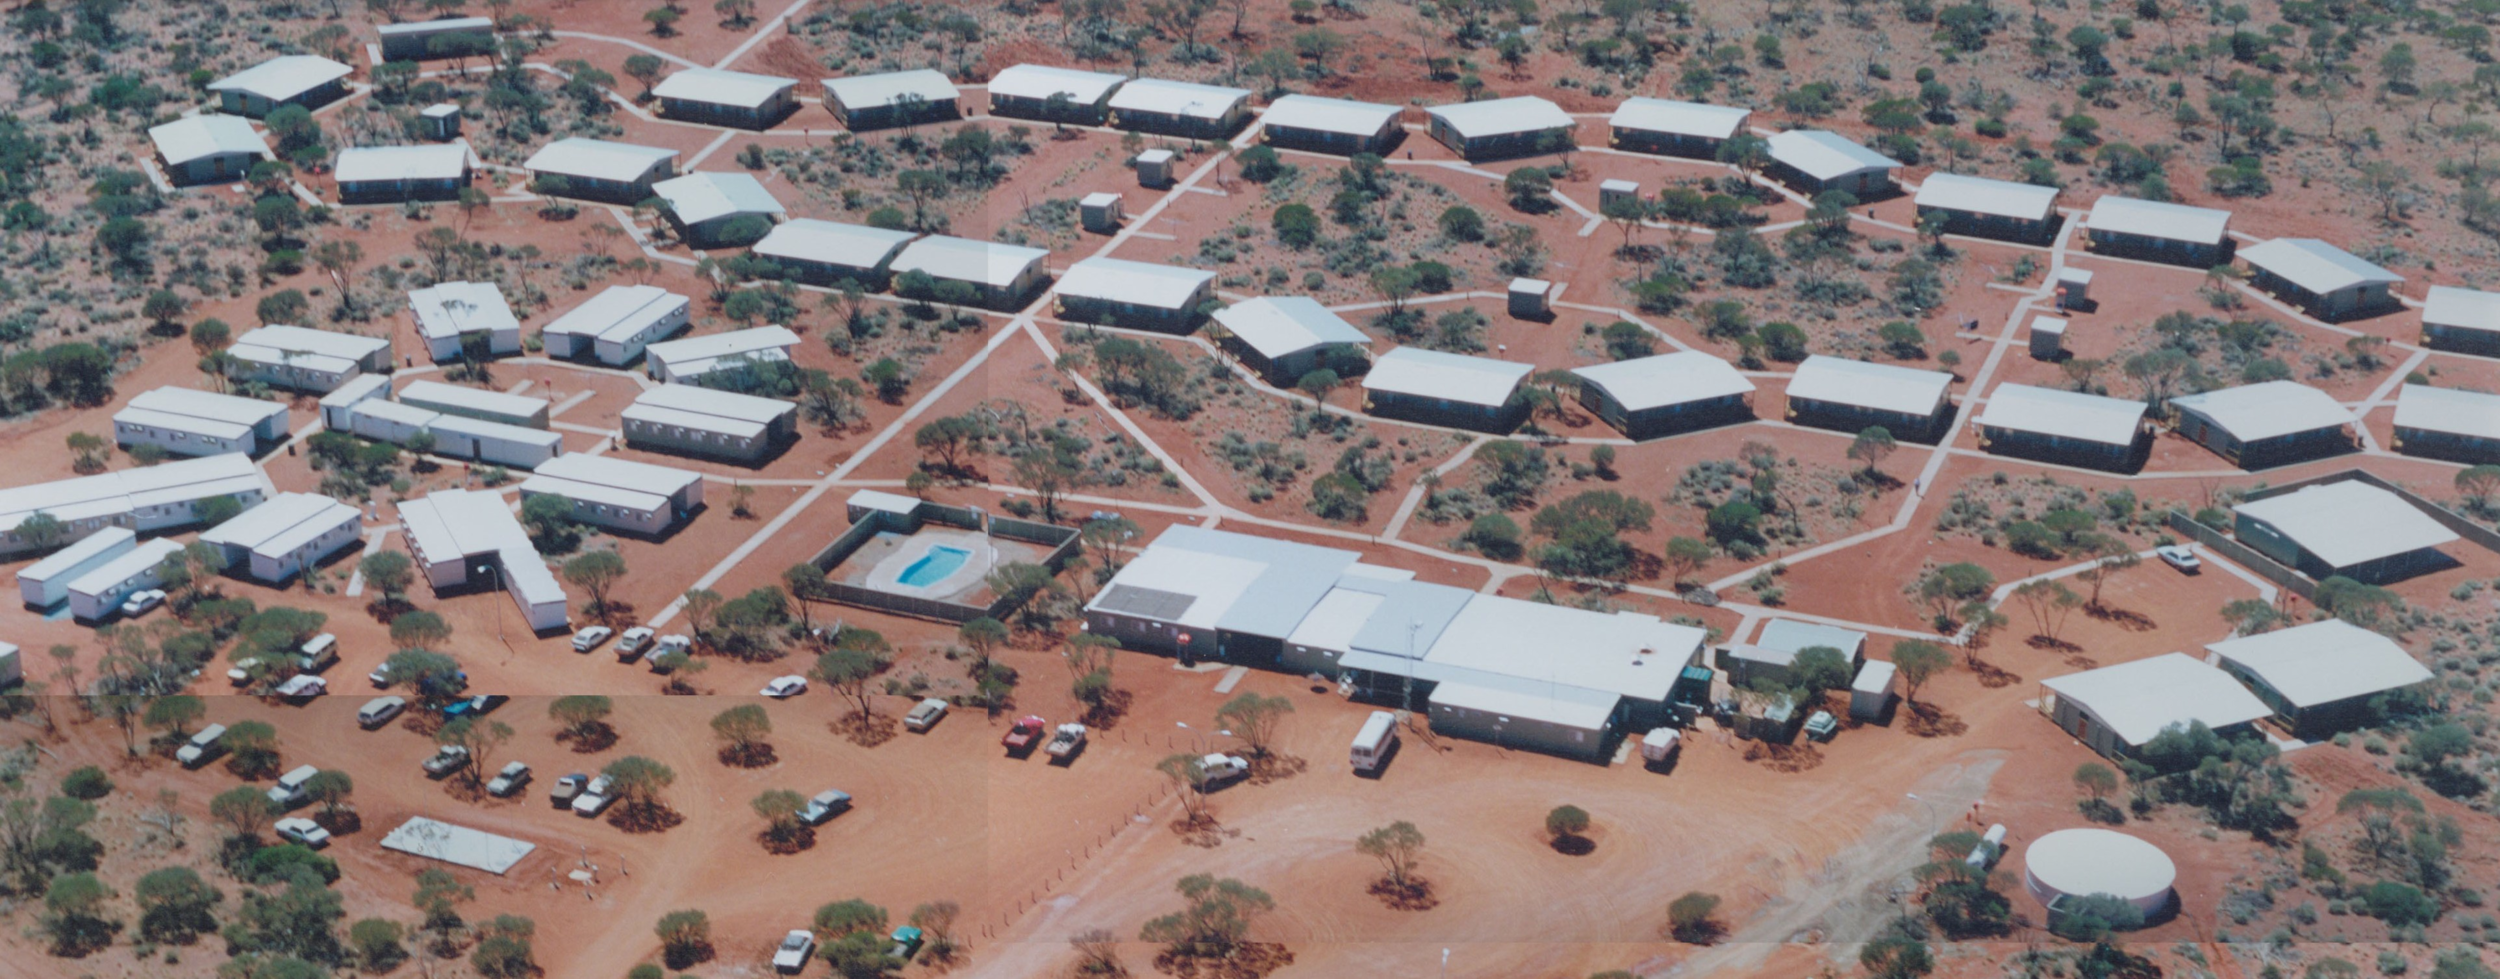 Typical Remote Area Mining Camp